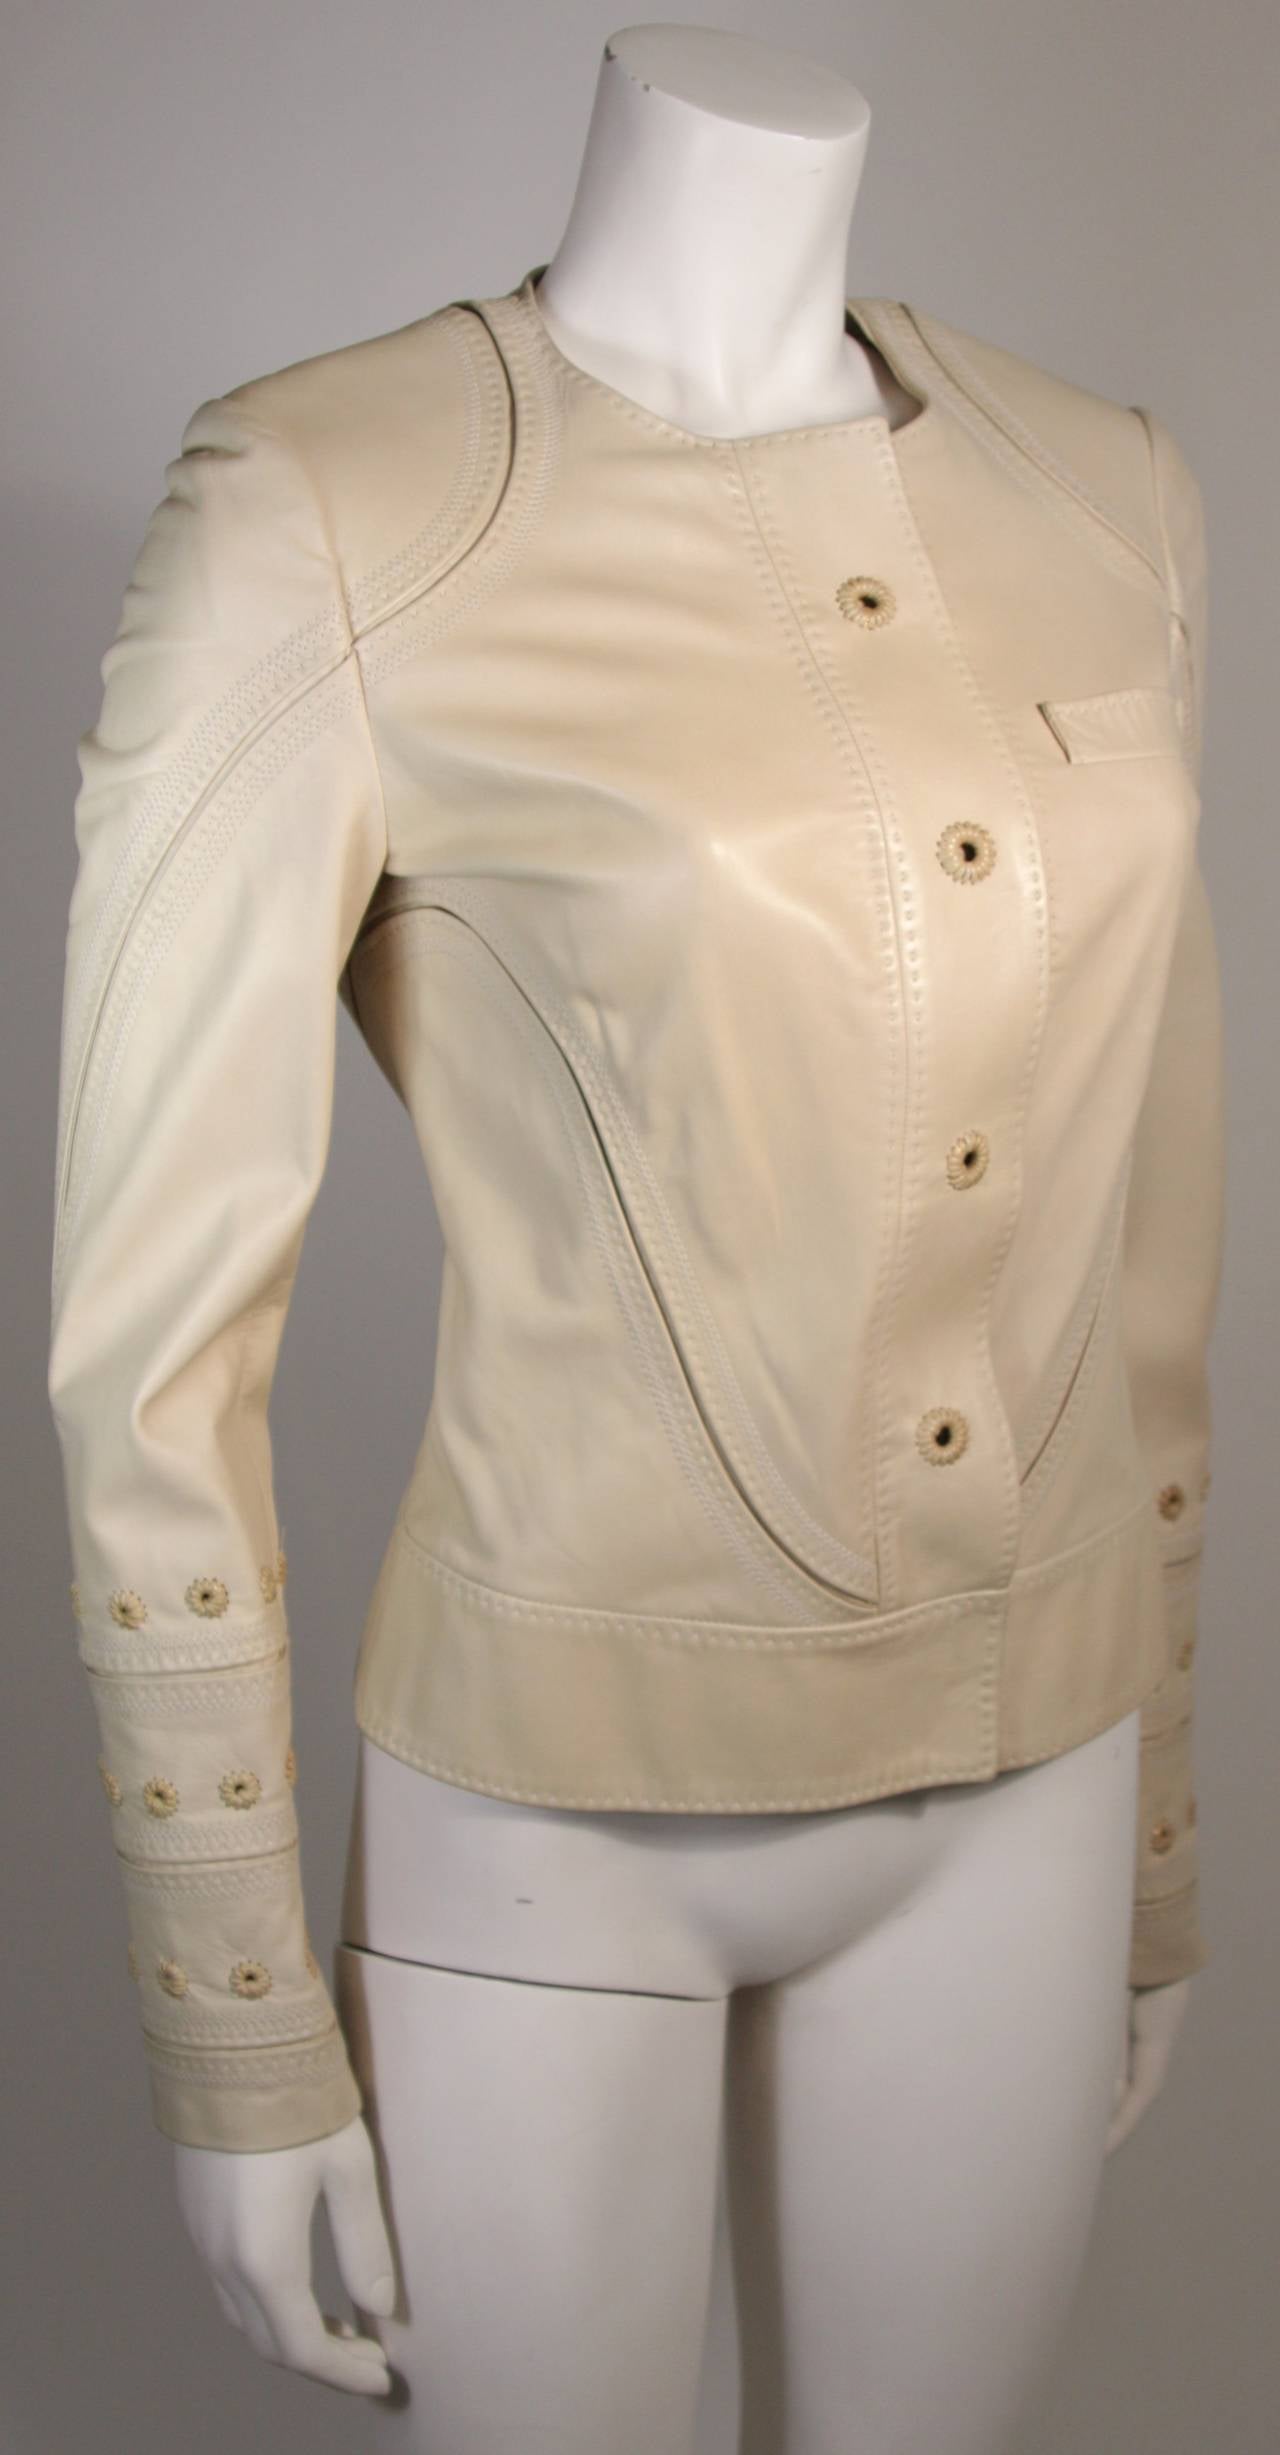 This is a Gucci jacket. The jacket is composed of an ultra light nude colored leather. There are center front closures; a zipper and large metal hook and eyes. Silk lining. Made in Italy. 

Measures (Approximately)
Length: 23